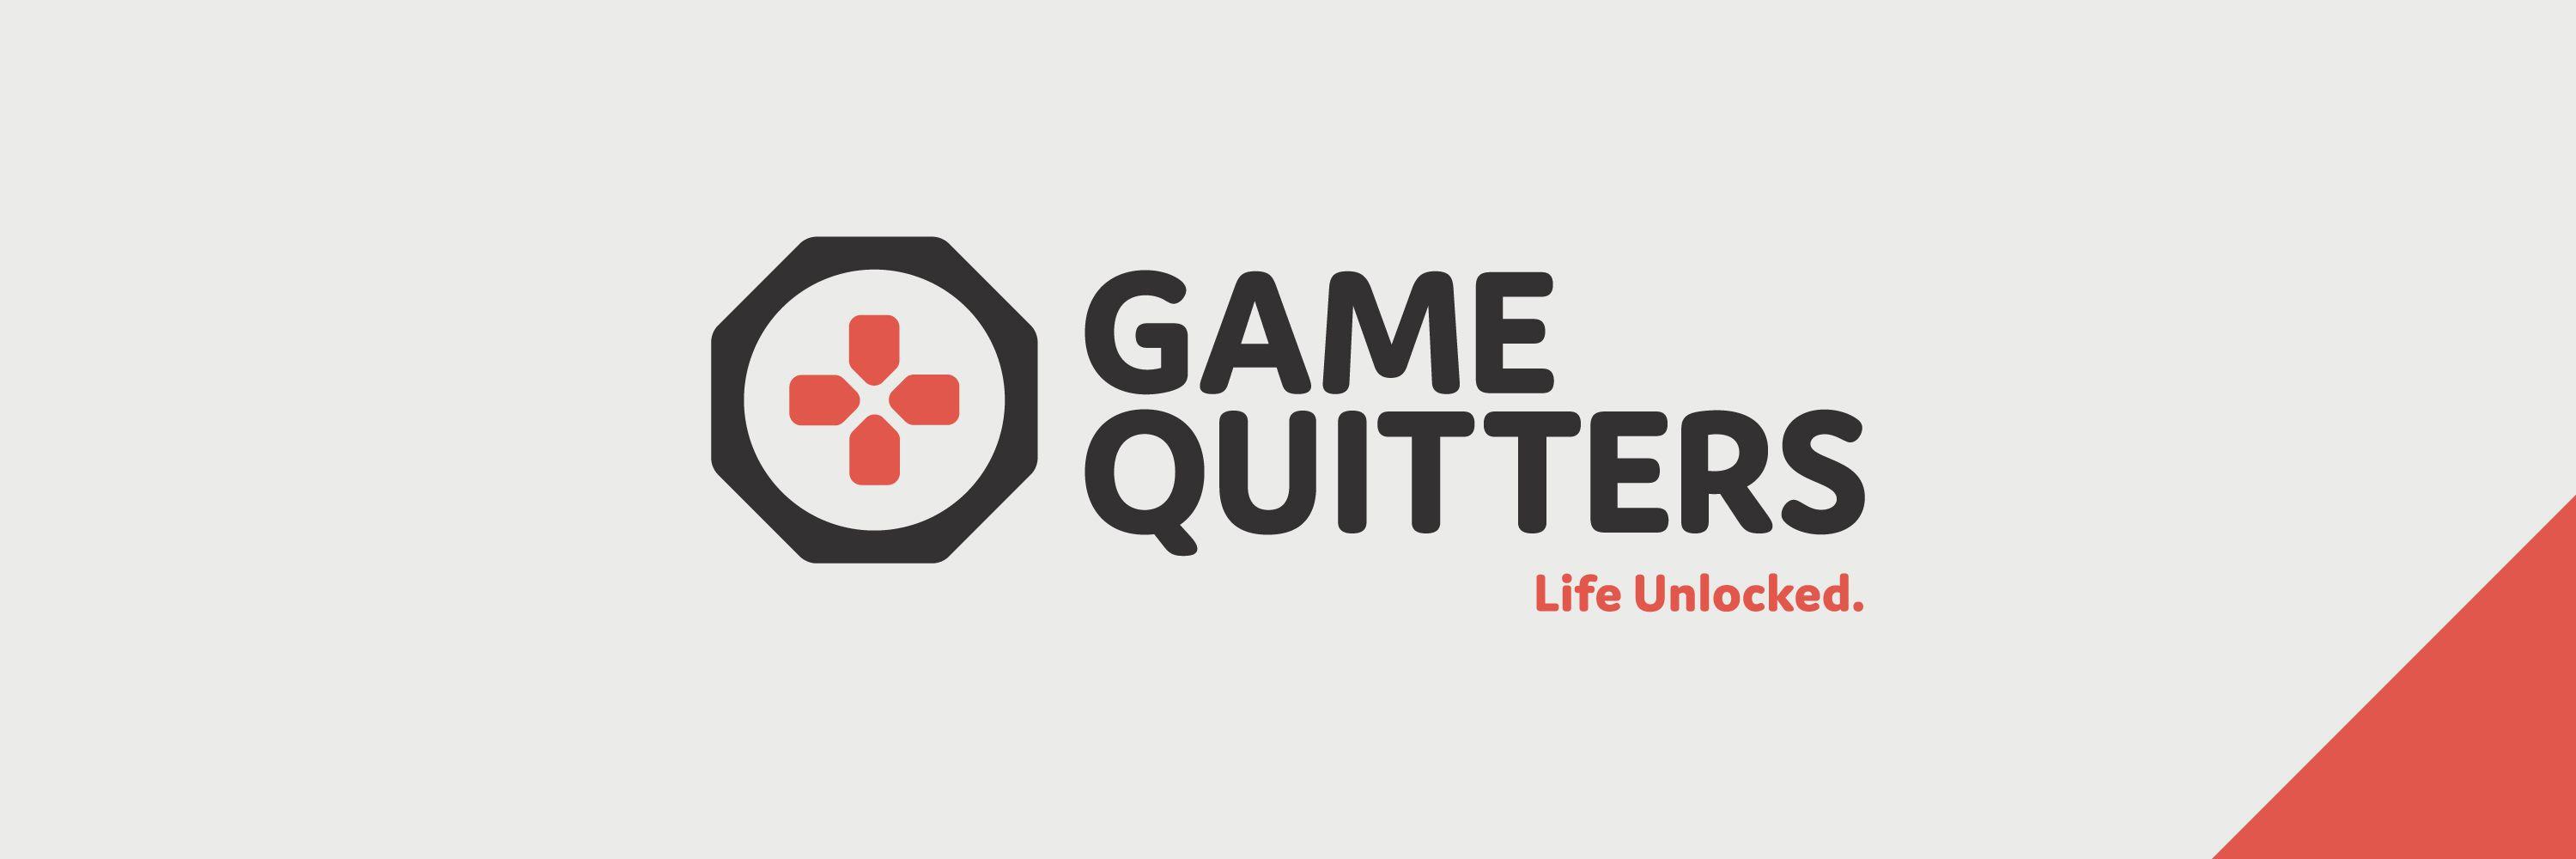 The Mental Gamer Logo - Video Game Addiction: Ready To Quit? Join Game Quitters Today